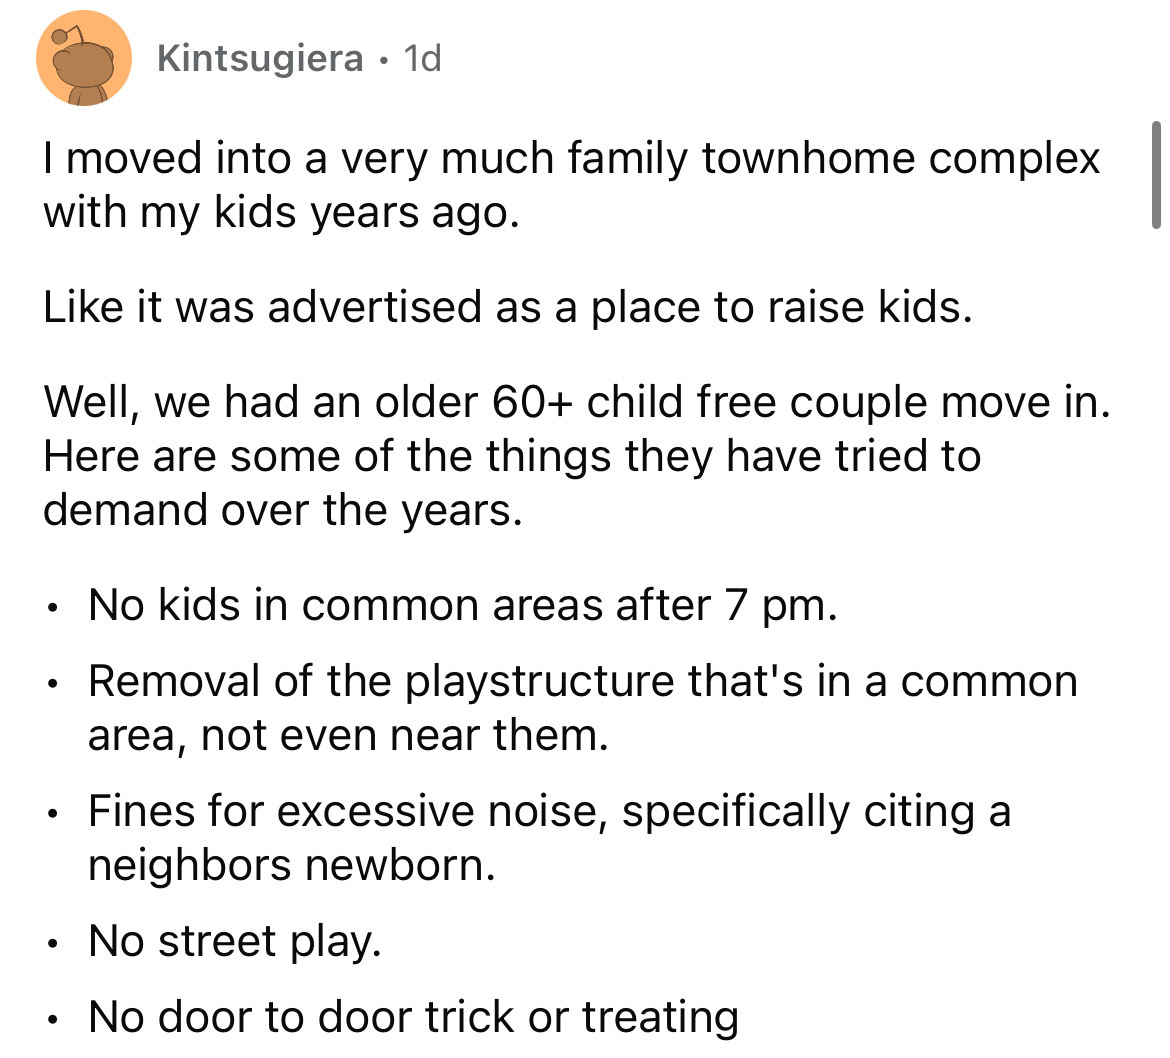 angle - Kintsugiera 1d I moved into a very much family townhome complex with my kids years ago. it was advertised as a place to raise kids. Well, we had an older 60 child free couple move in. Here are some of the things they have tried to demand over the 